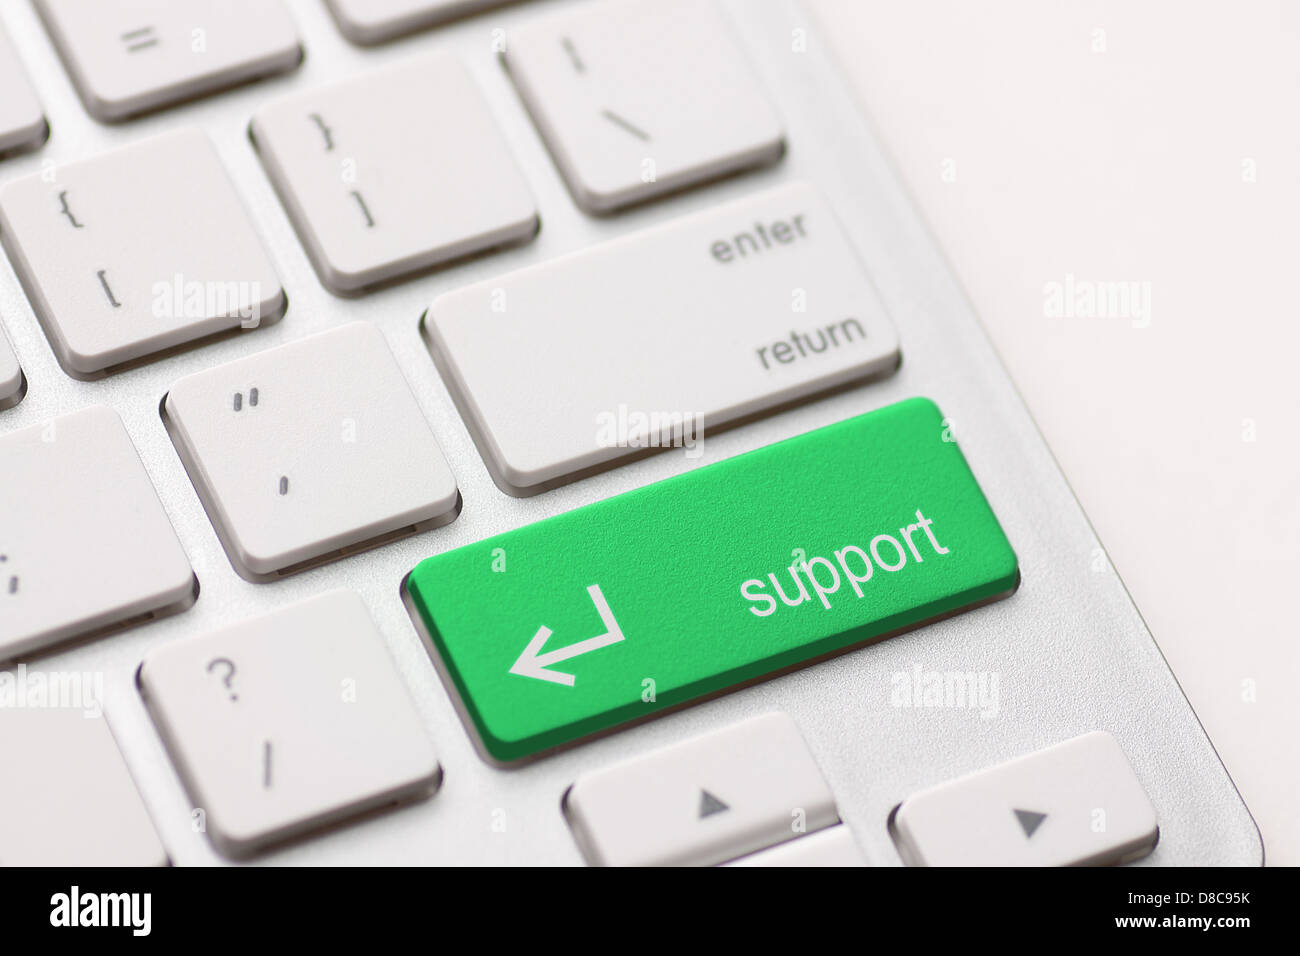 A computers support key on white keyboard Stock Photo